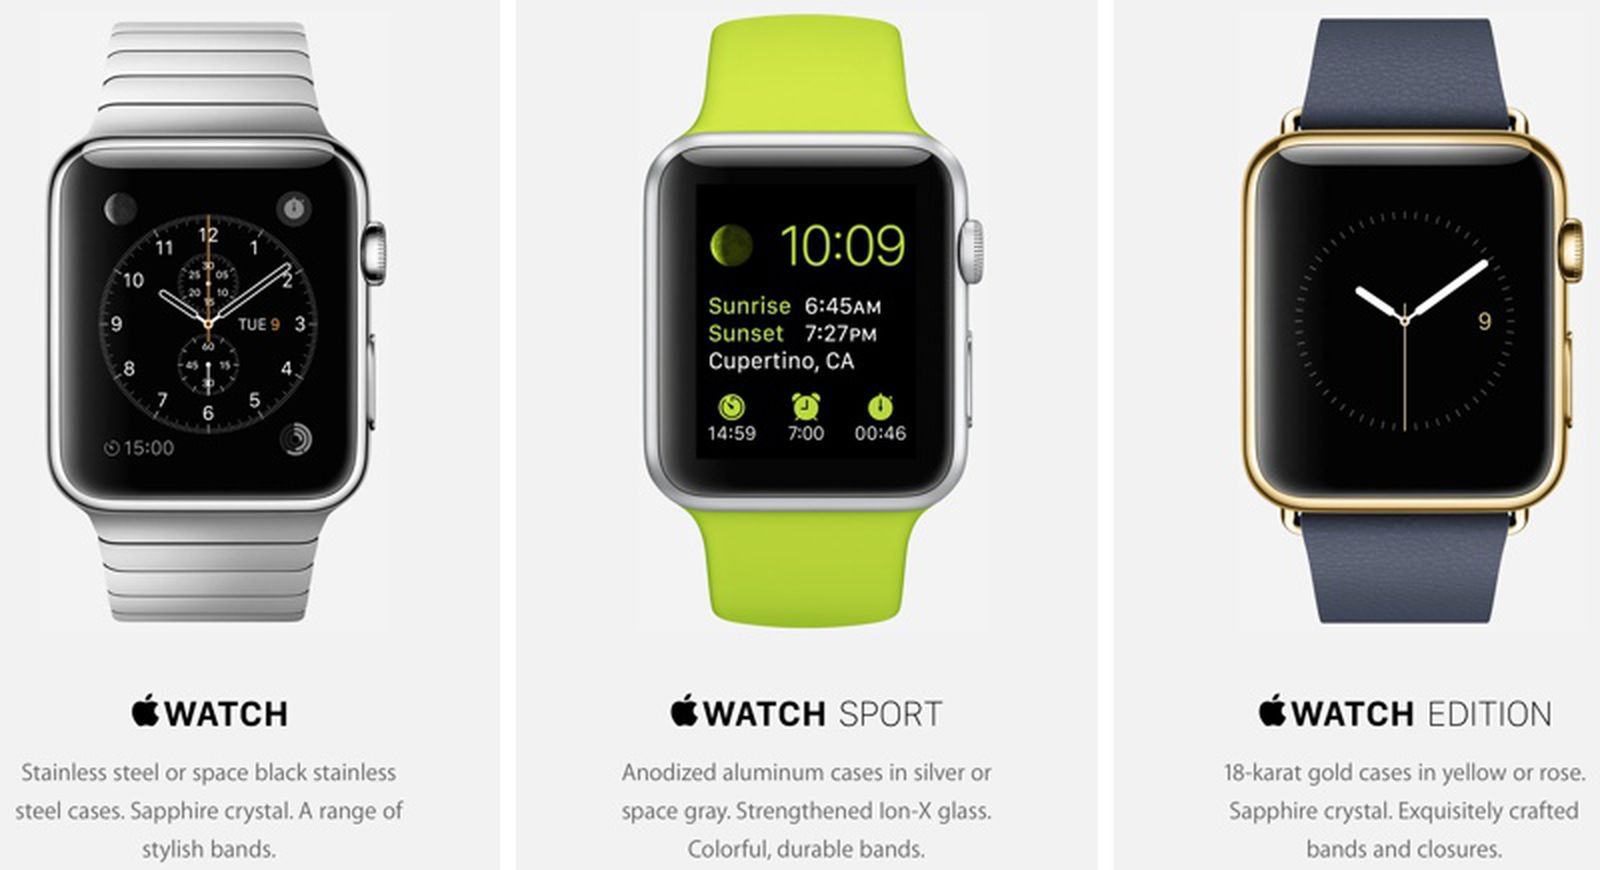 Apple has upgraded its flagship Apple Watch wearable regularly since introducing the device in 2015. 